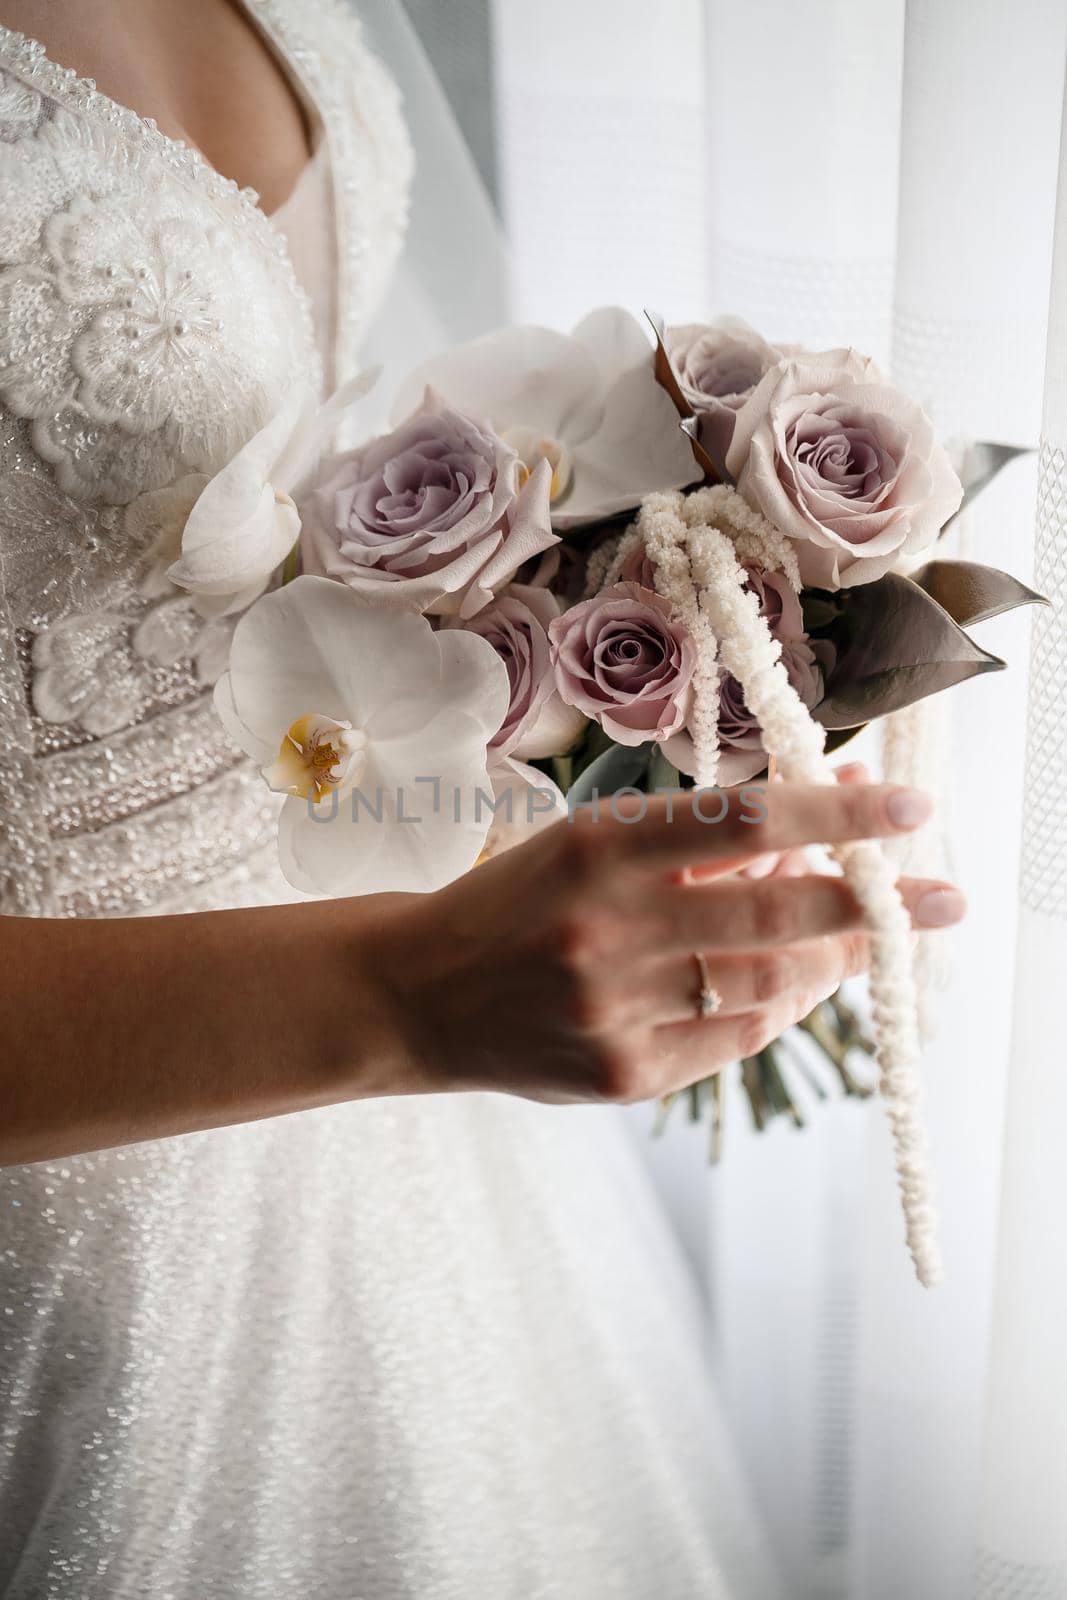 Beautiful bride holding a delicate bouquet of flowers in her hands on a wedding day